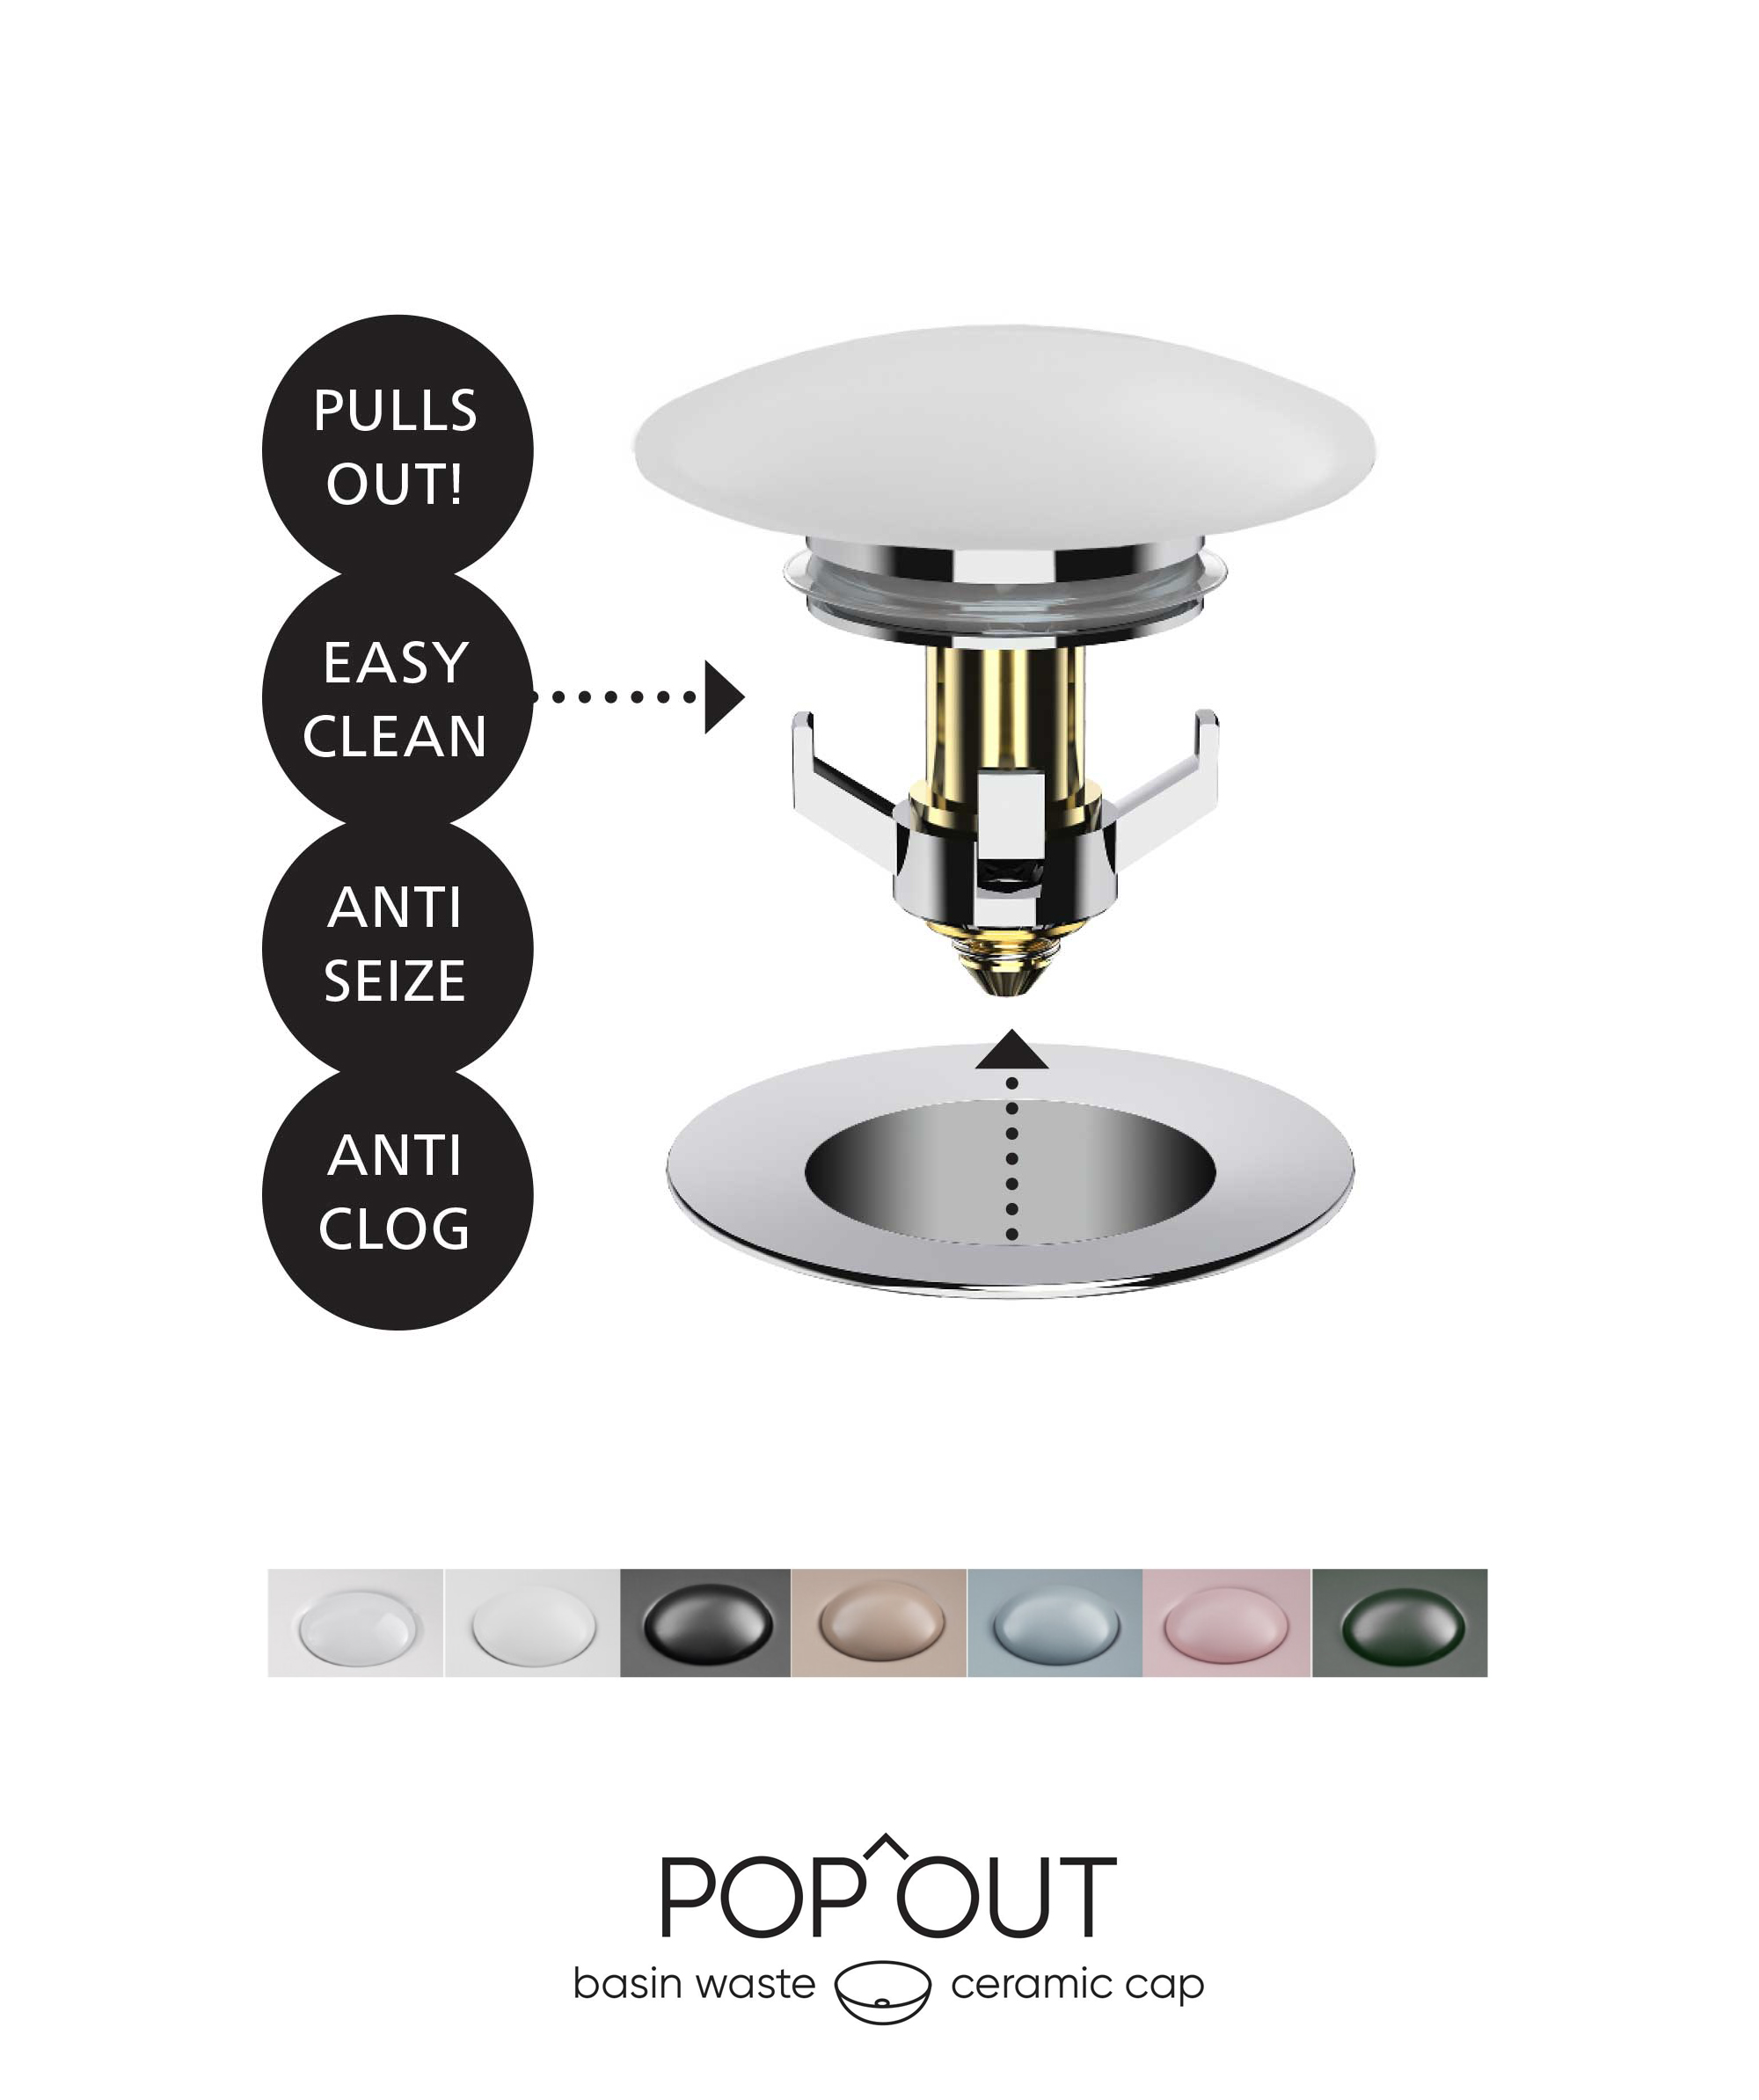 Ceramic Pop-out Basin Waste – ceramic cap and chrome pop-out base